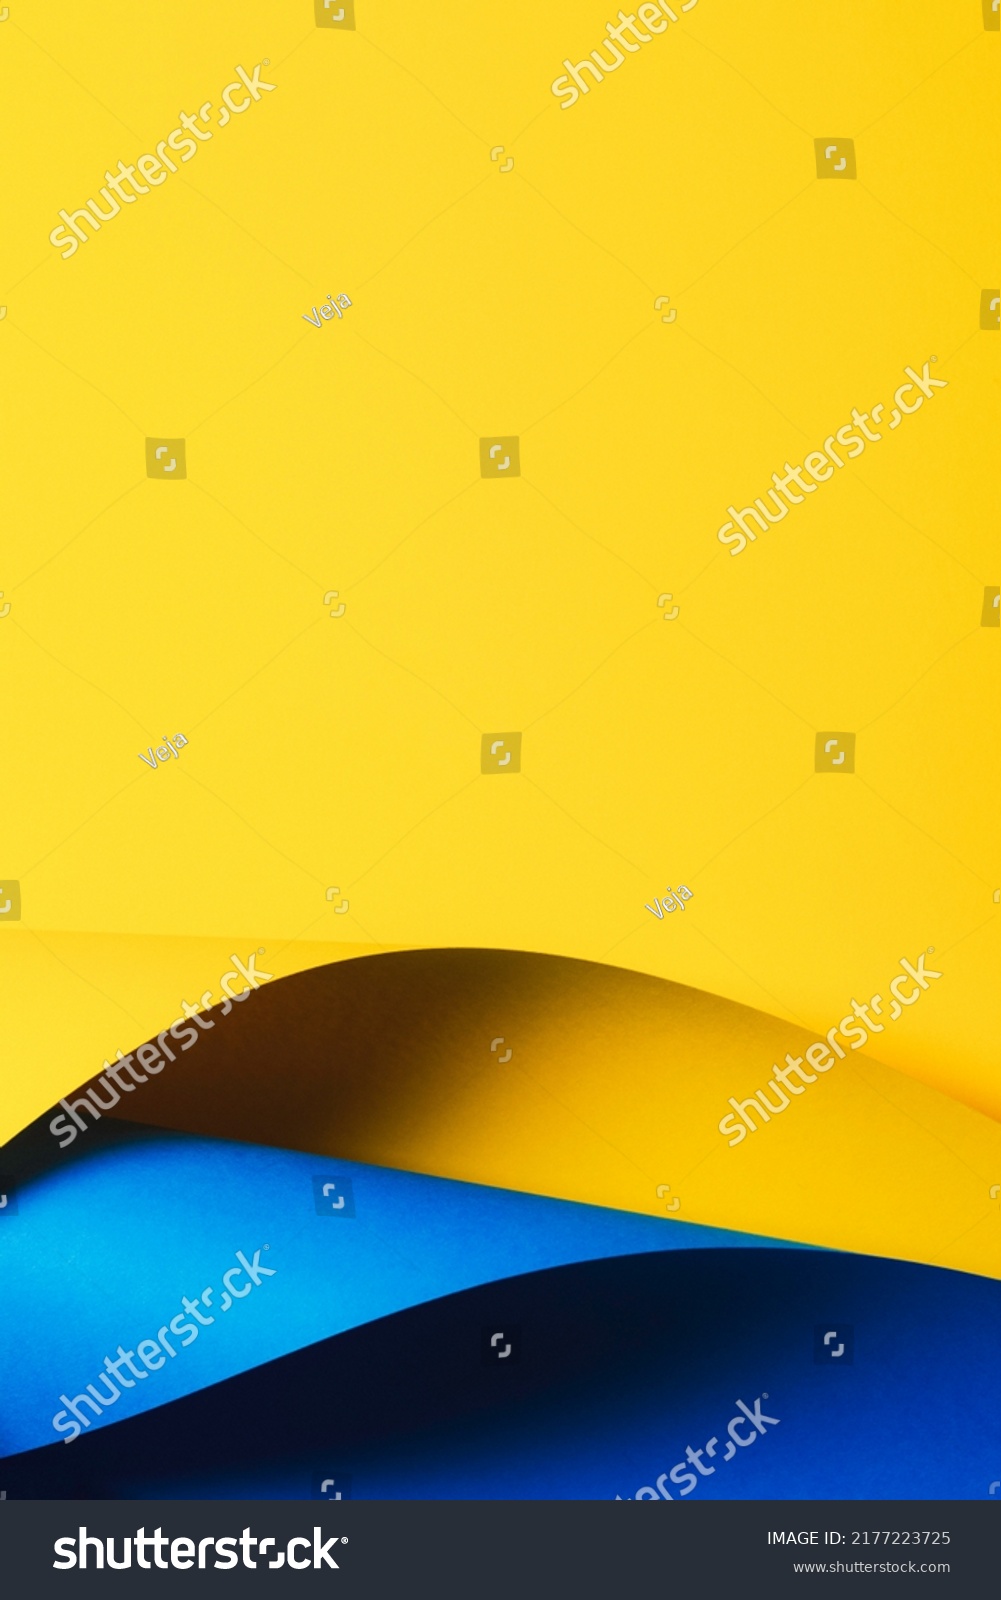 Abstract wave of yellow and light blue paper. Creative geometric curved paper with light and shadows. Abstract geometry background with copy space #2177223725